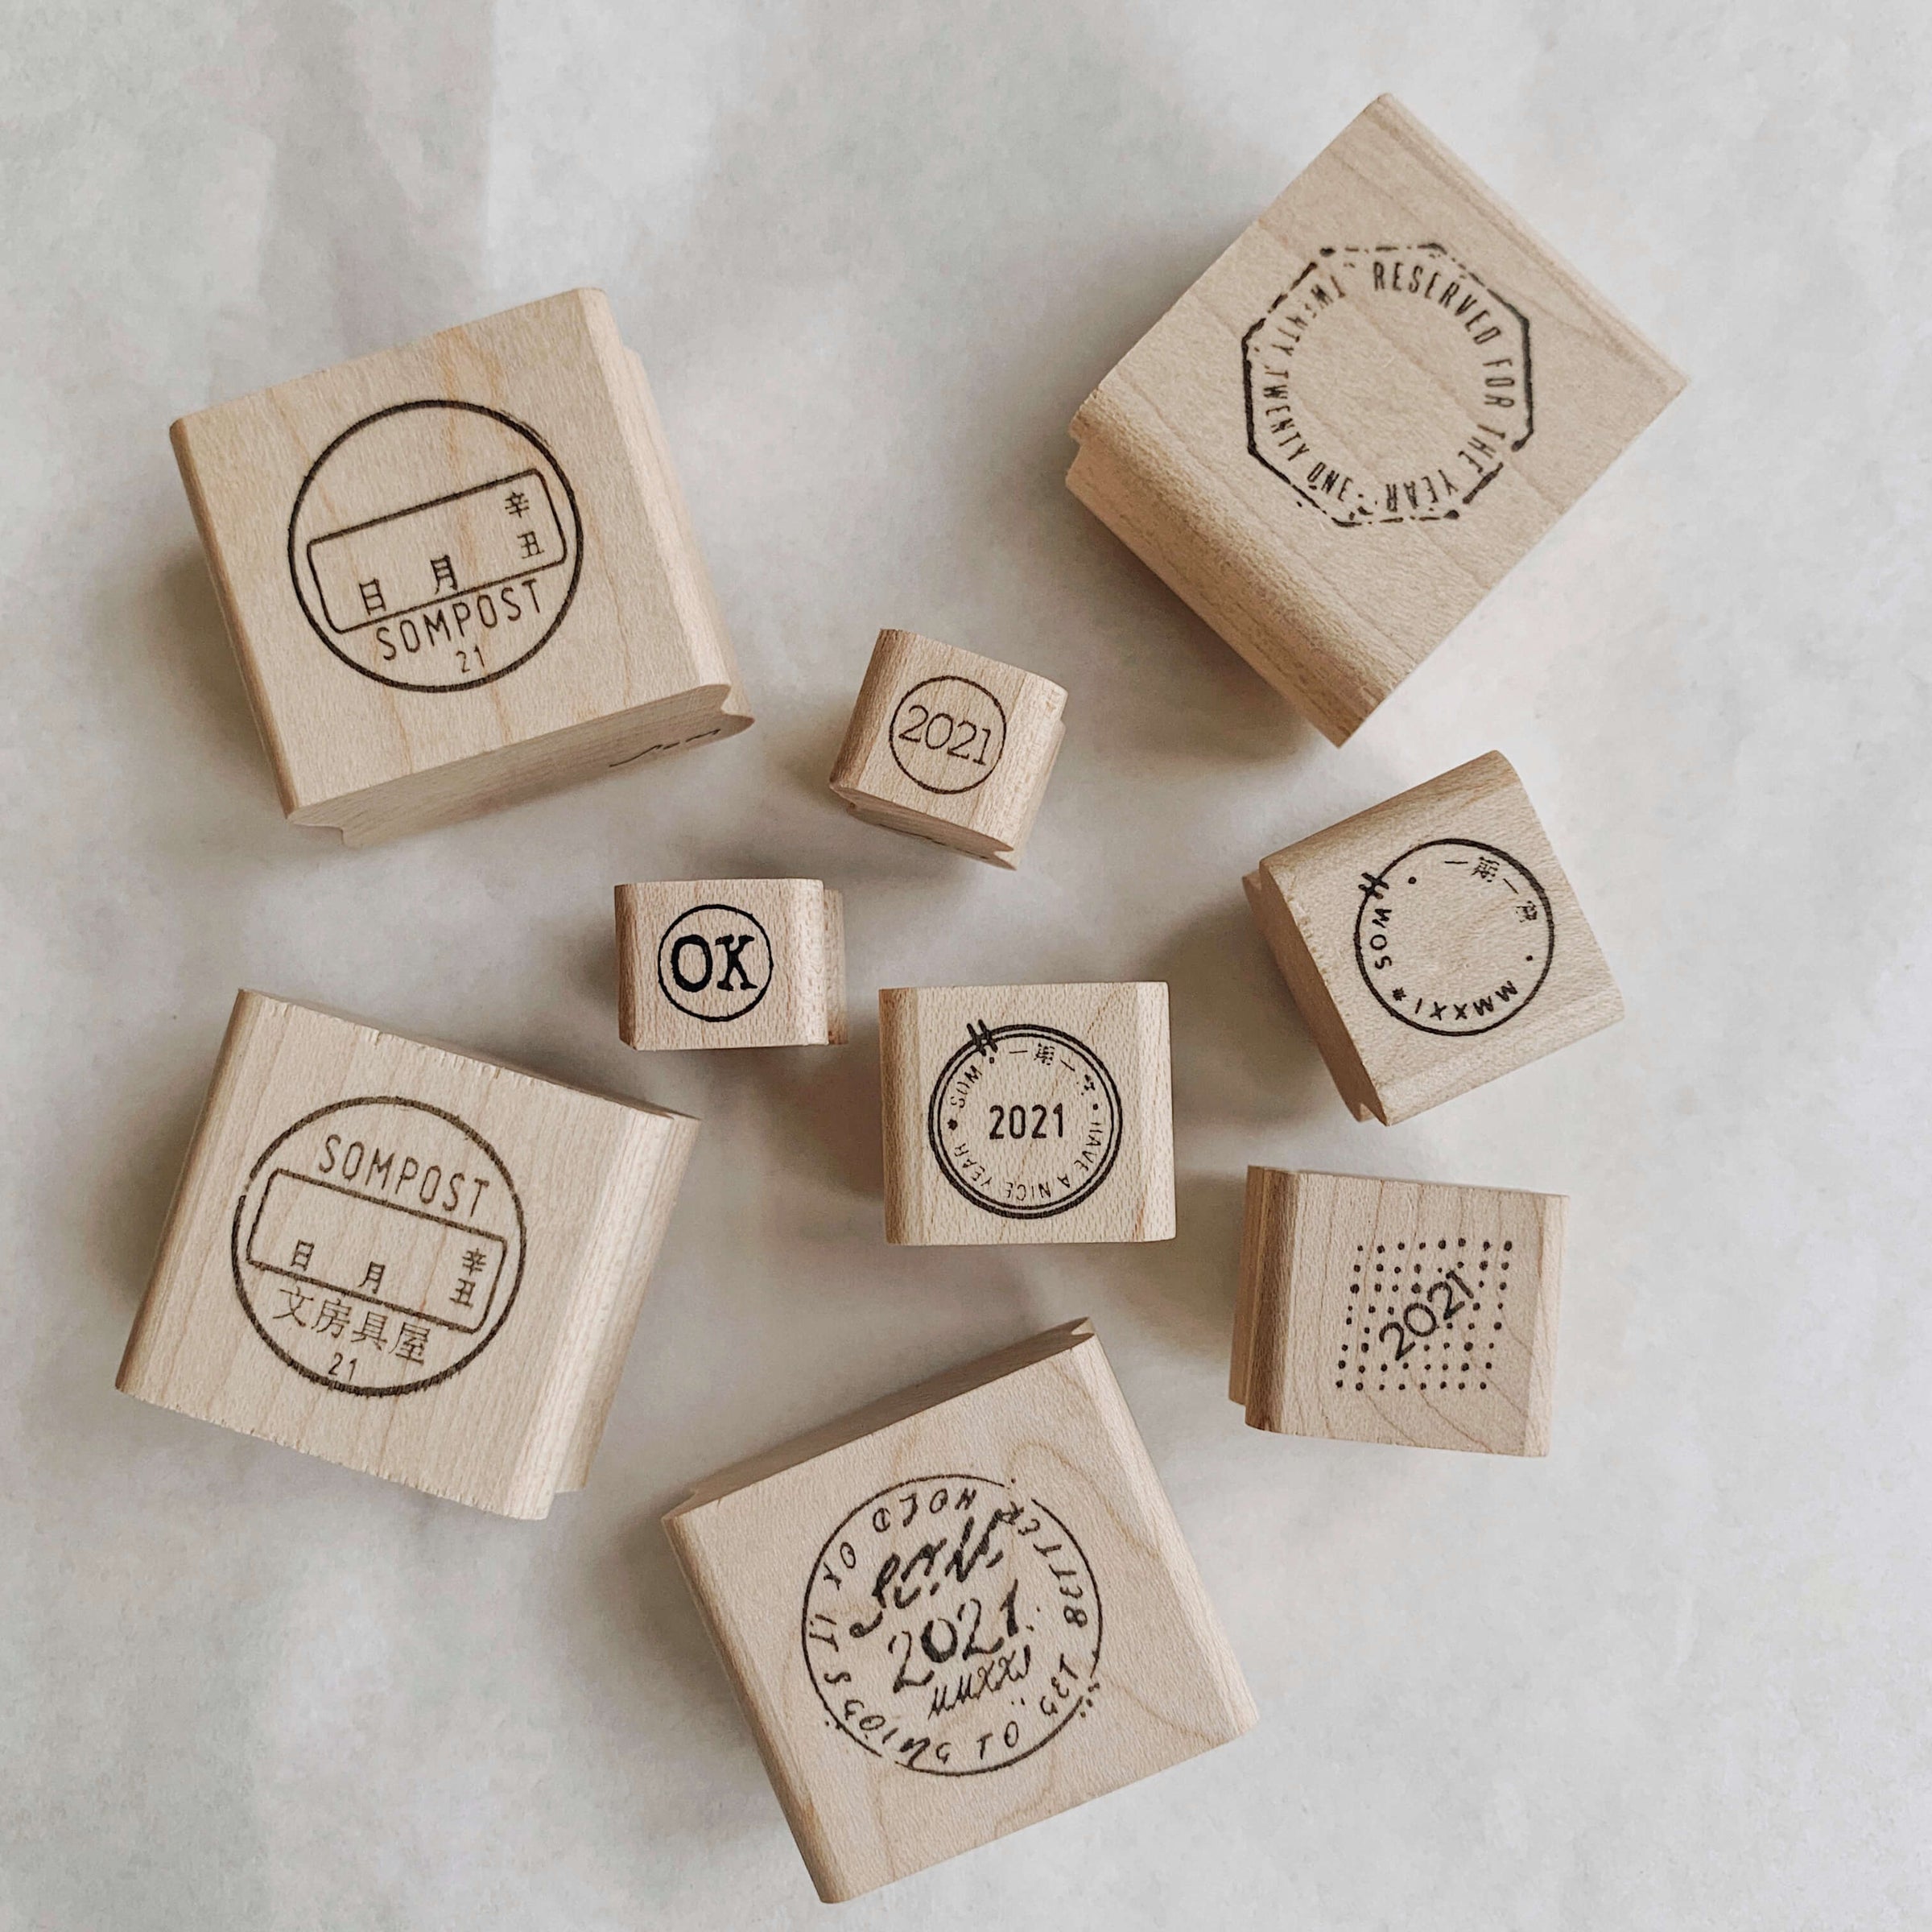 2021 Postmark Rubber Stamp – Sumthings of Mine